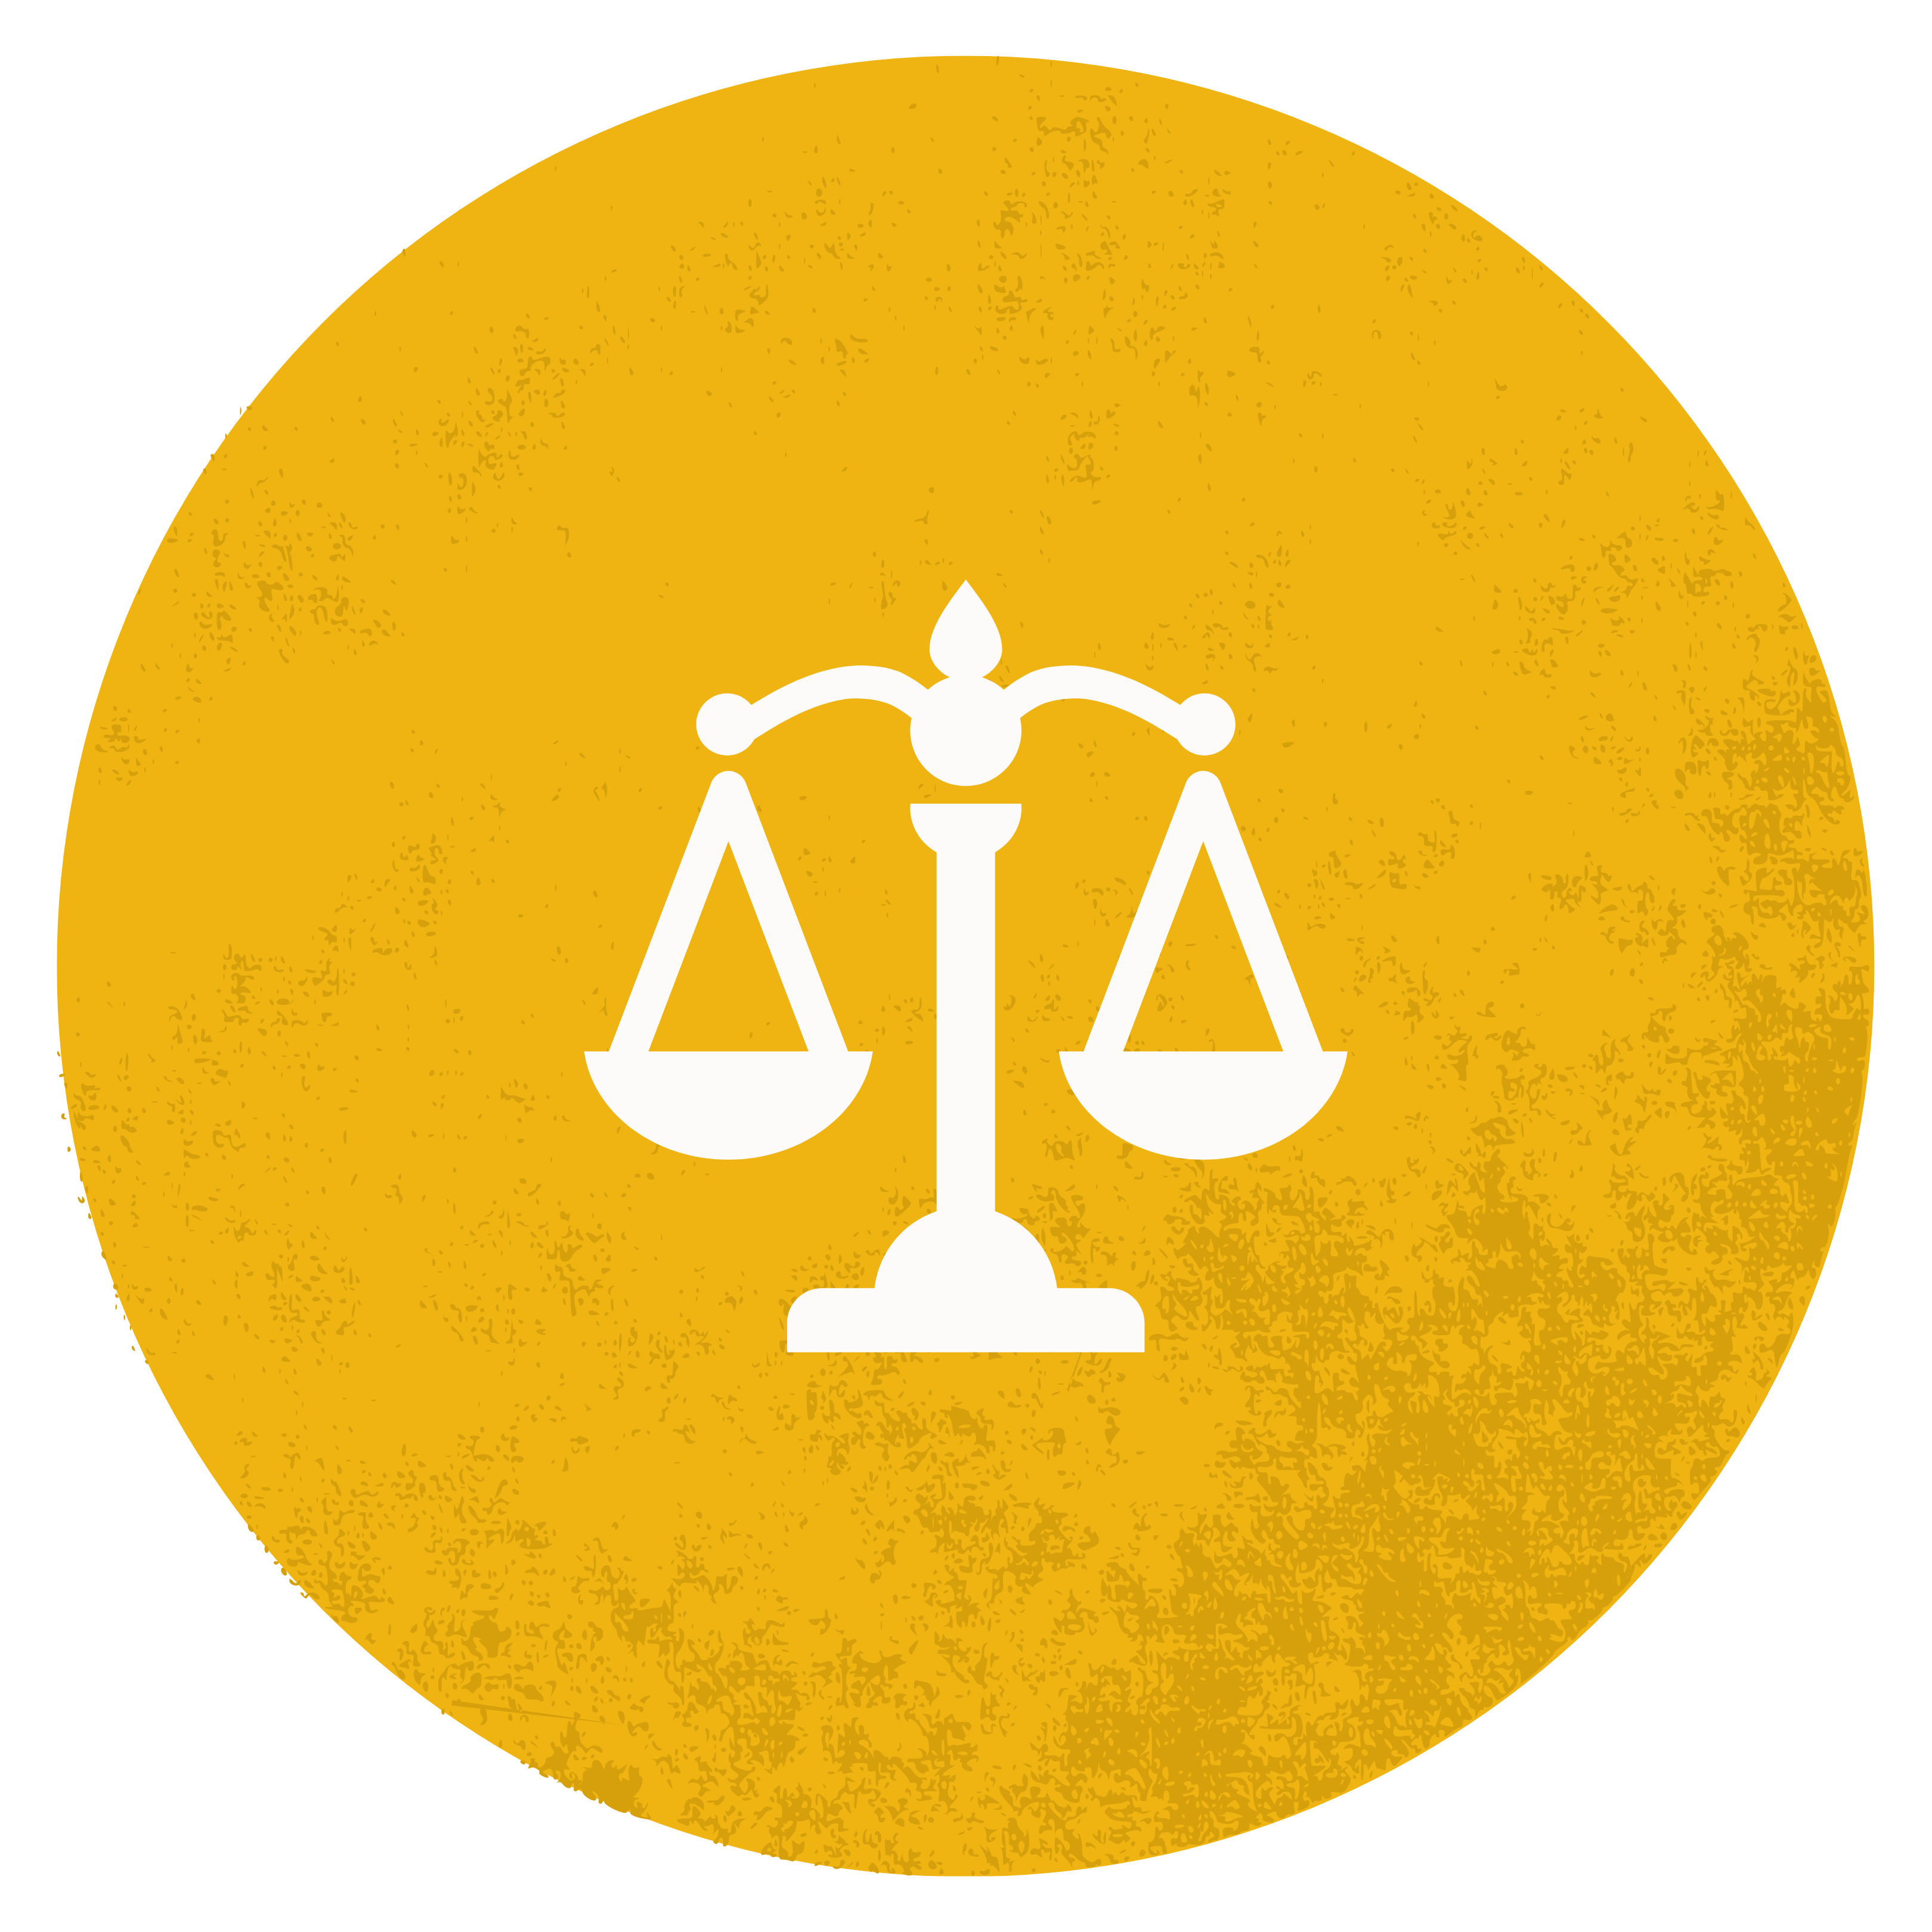 An illustration of a balanced scale on a textured yellow background.